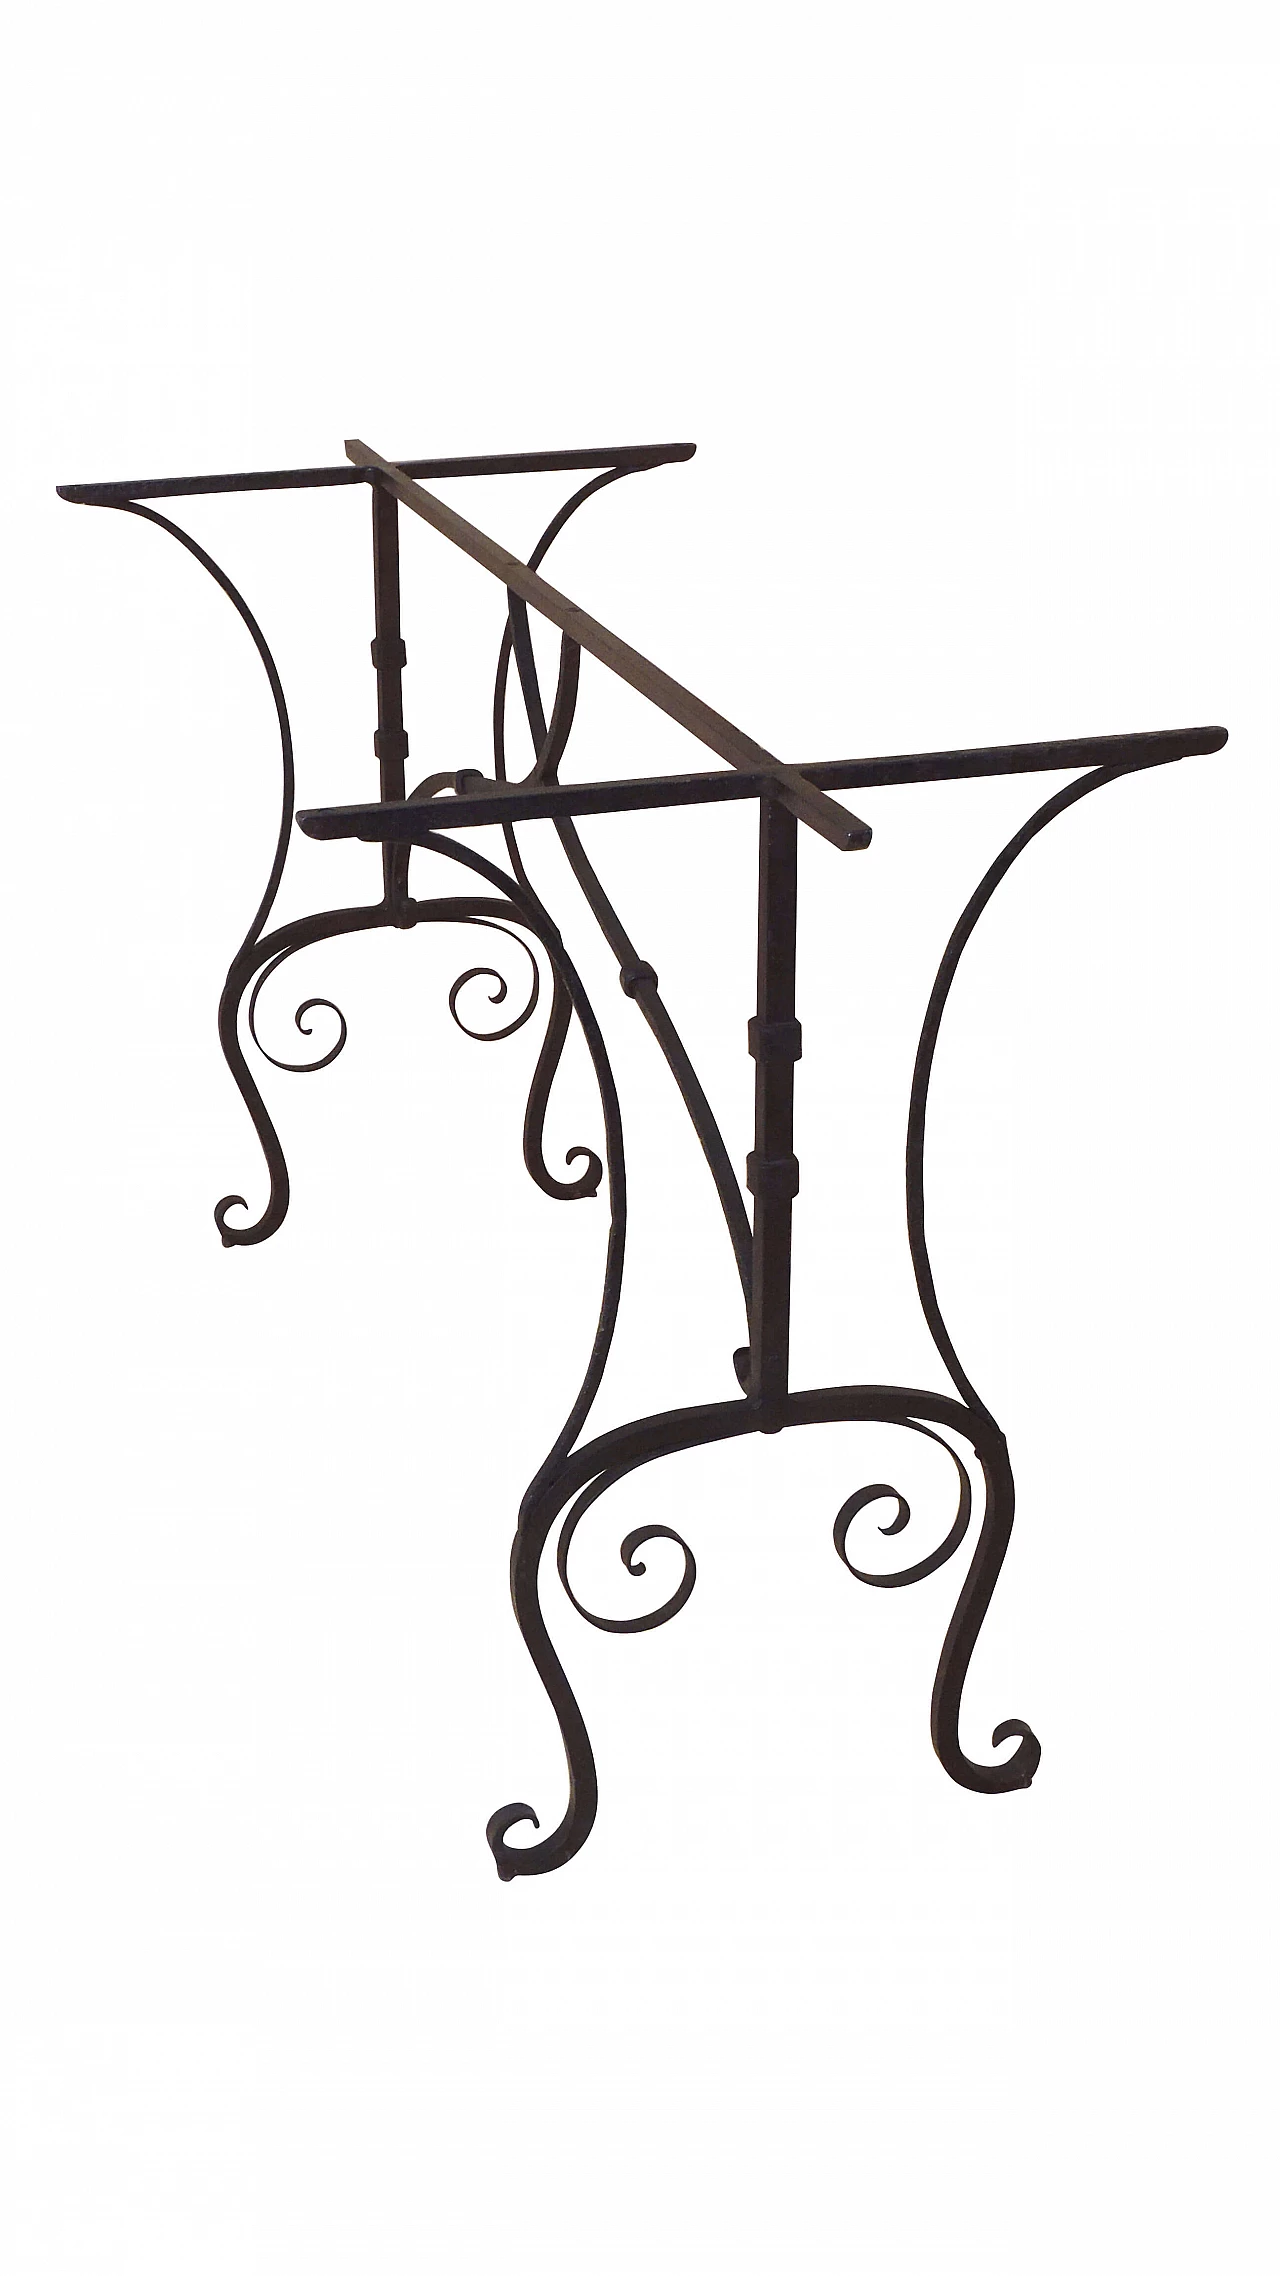 Wrought iron table created with litter tray 1089688